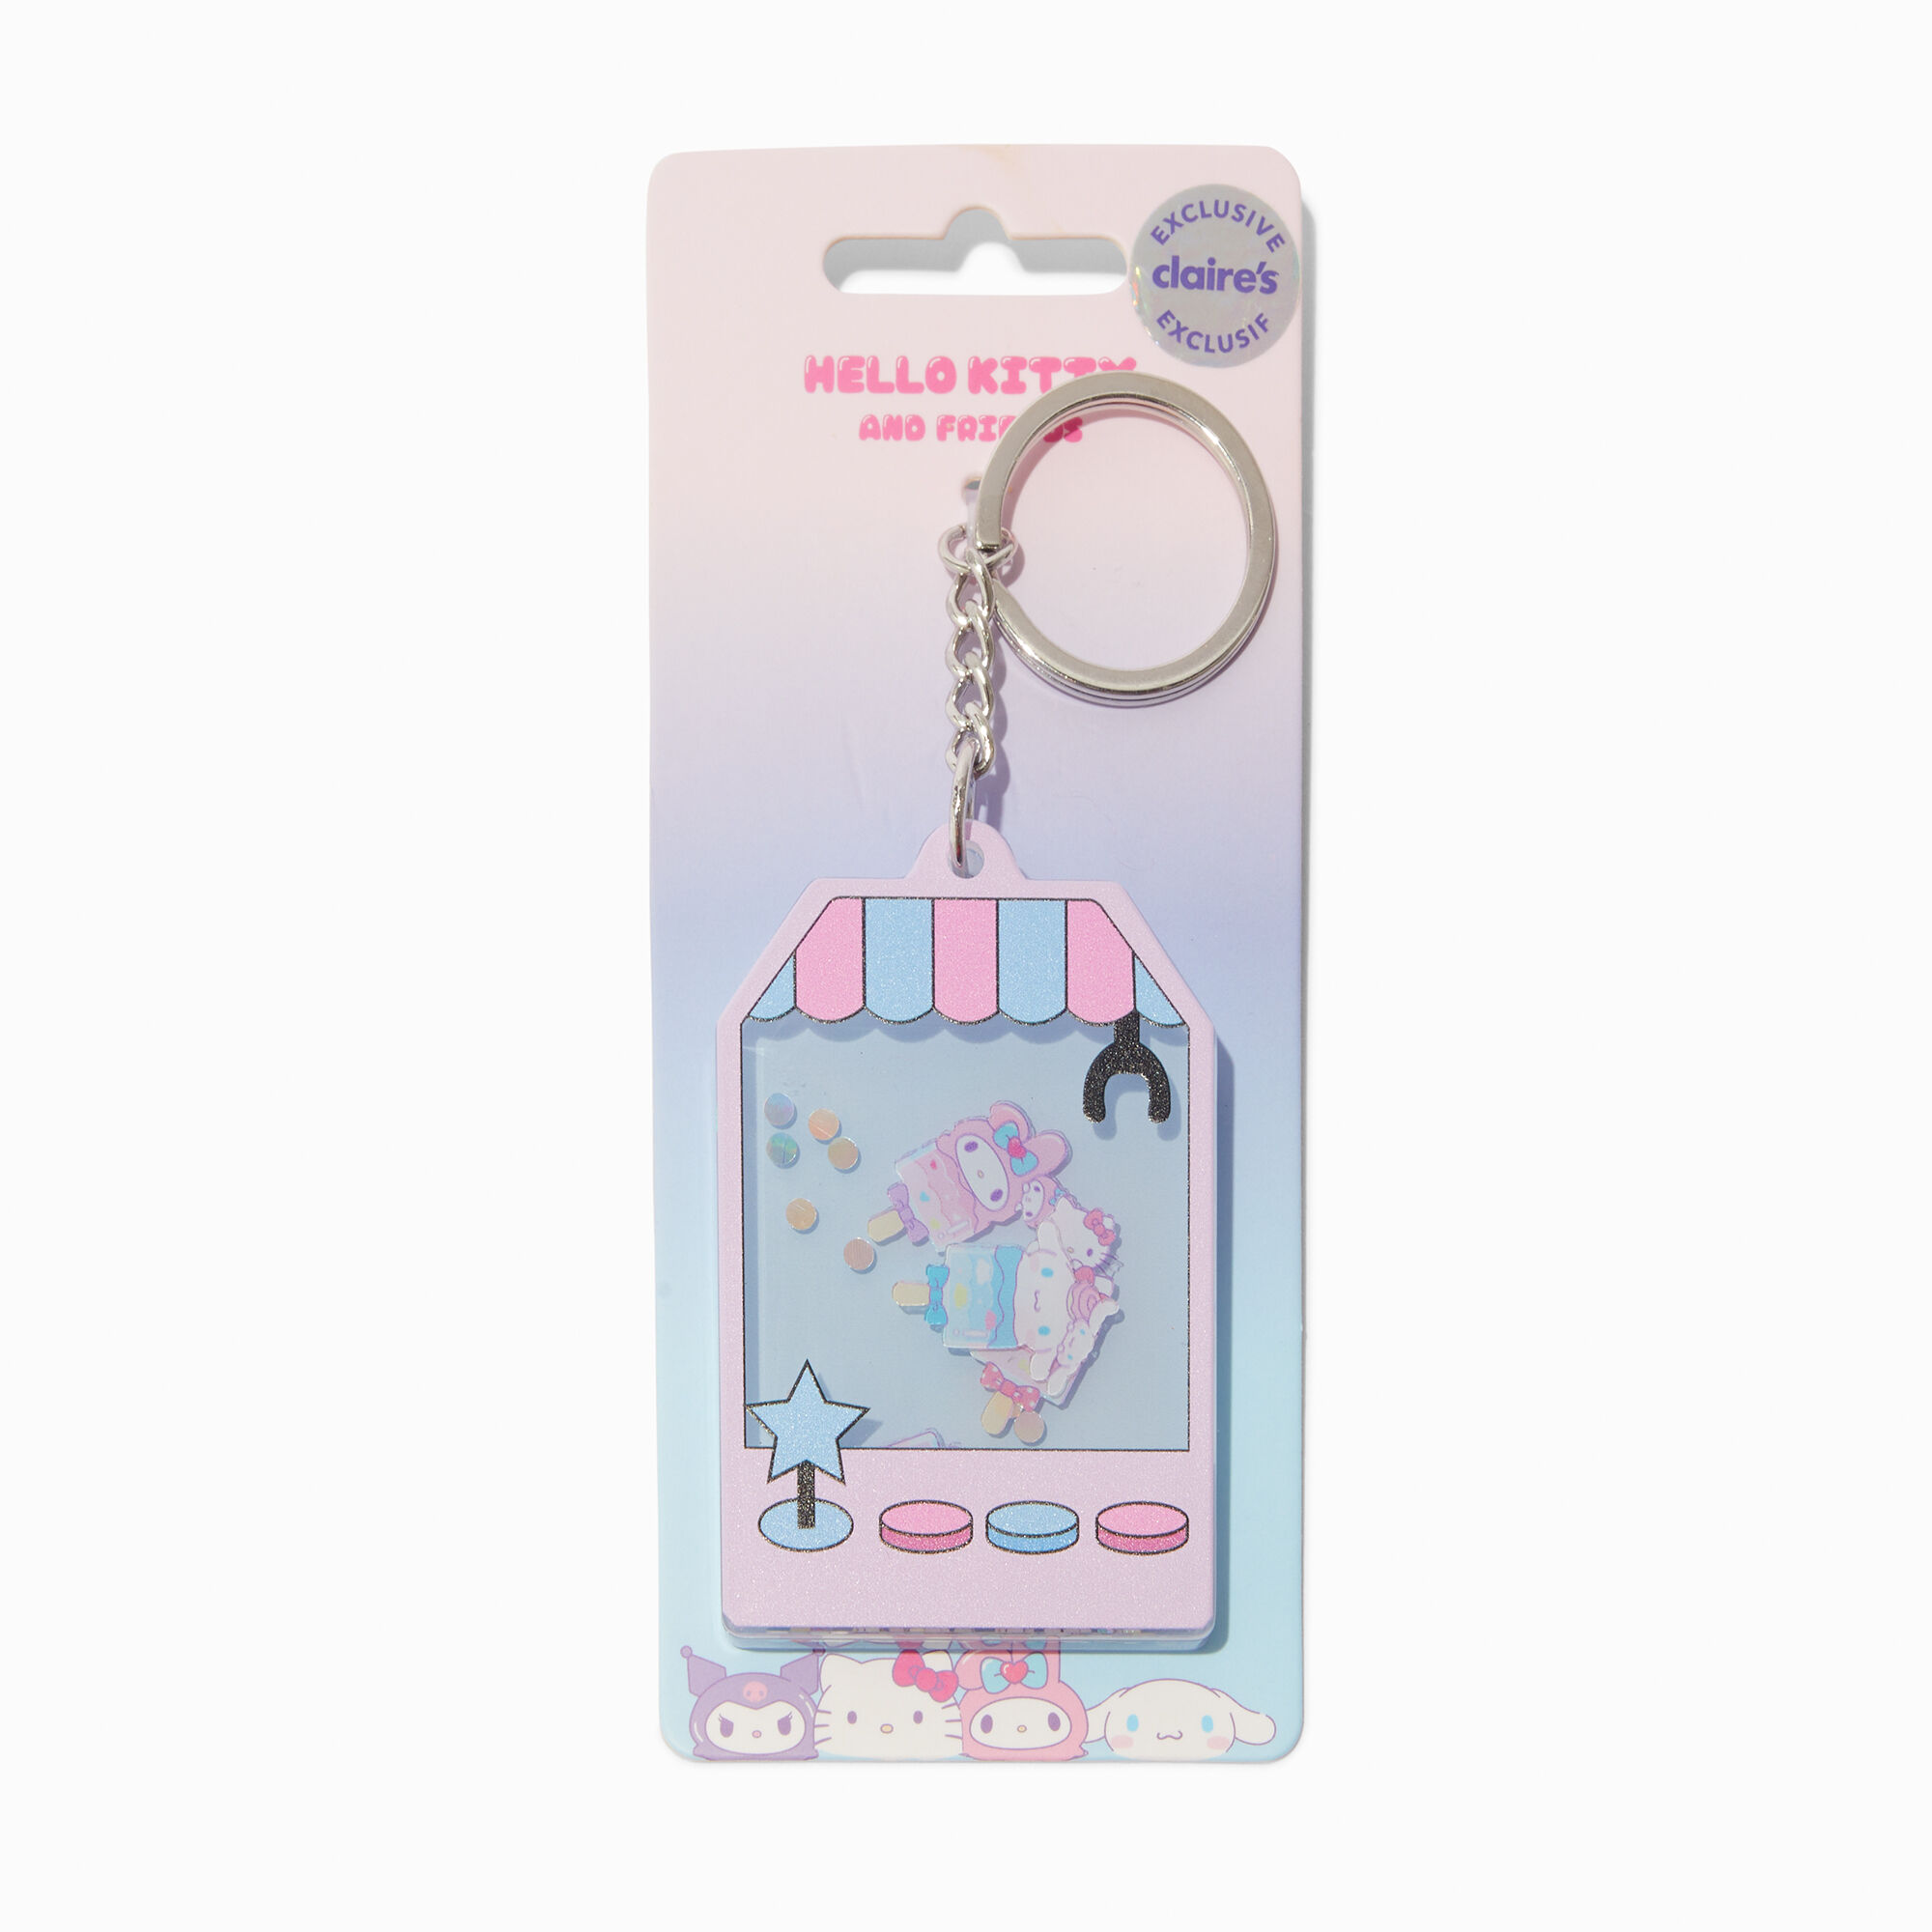 View Hello Kitty And Friends Claires Exclusive WaterFilled Game Keyring information